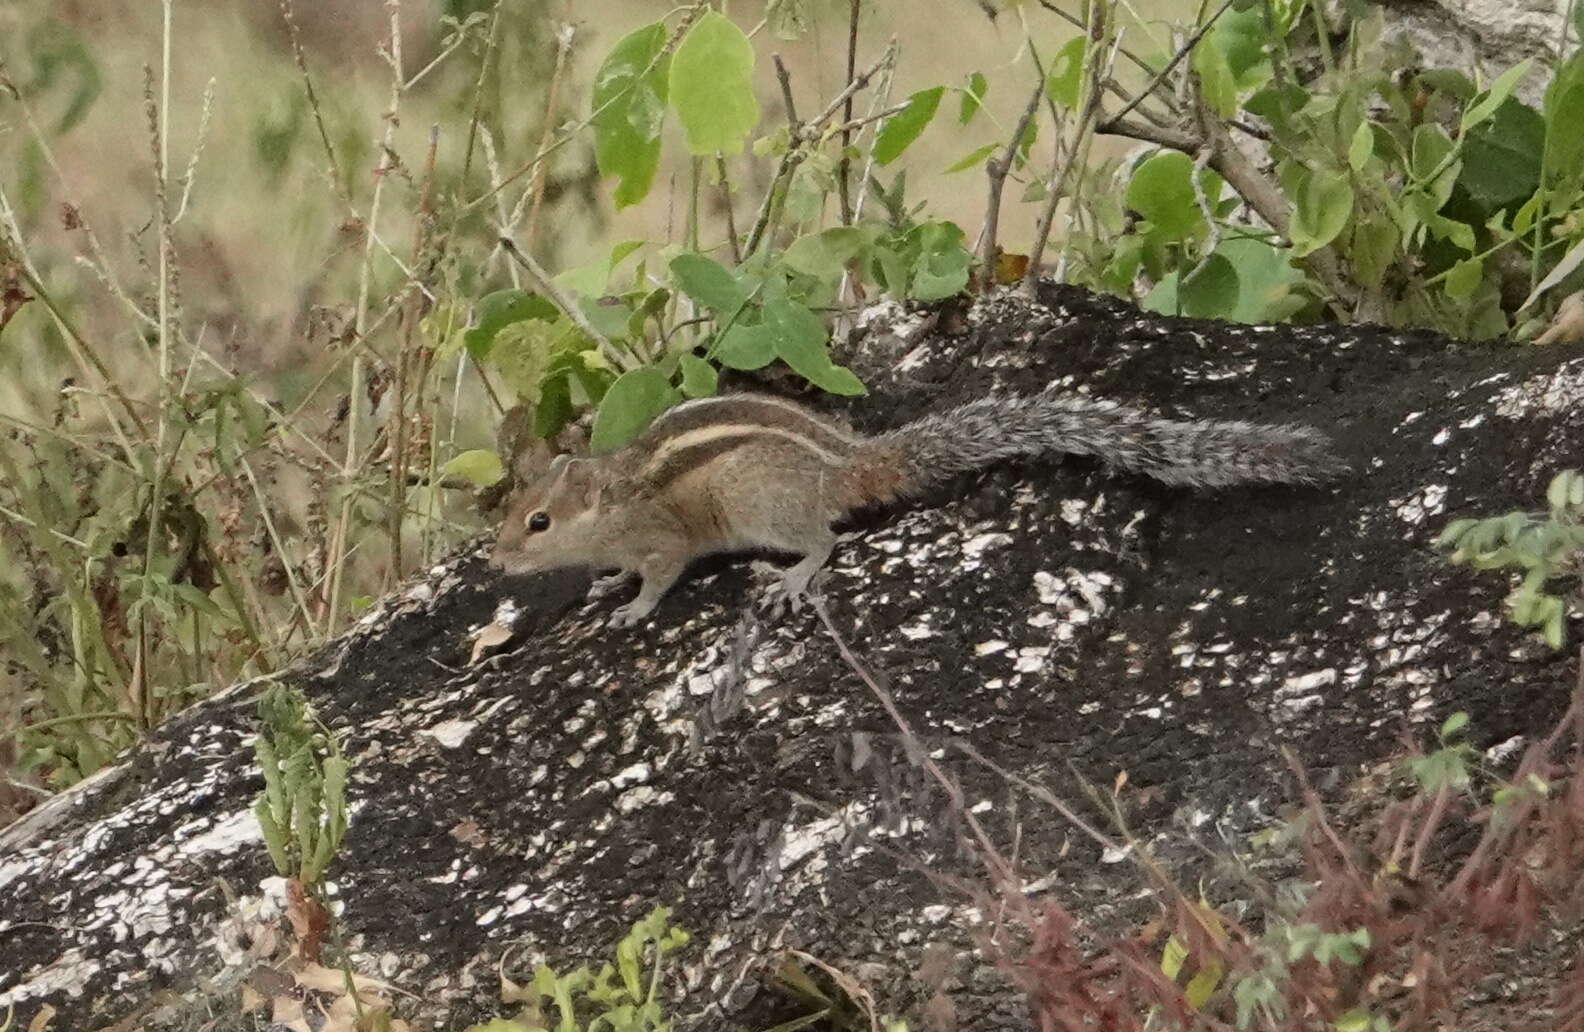 Image of Indian palm squirrel